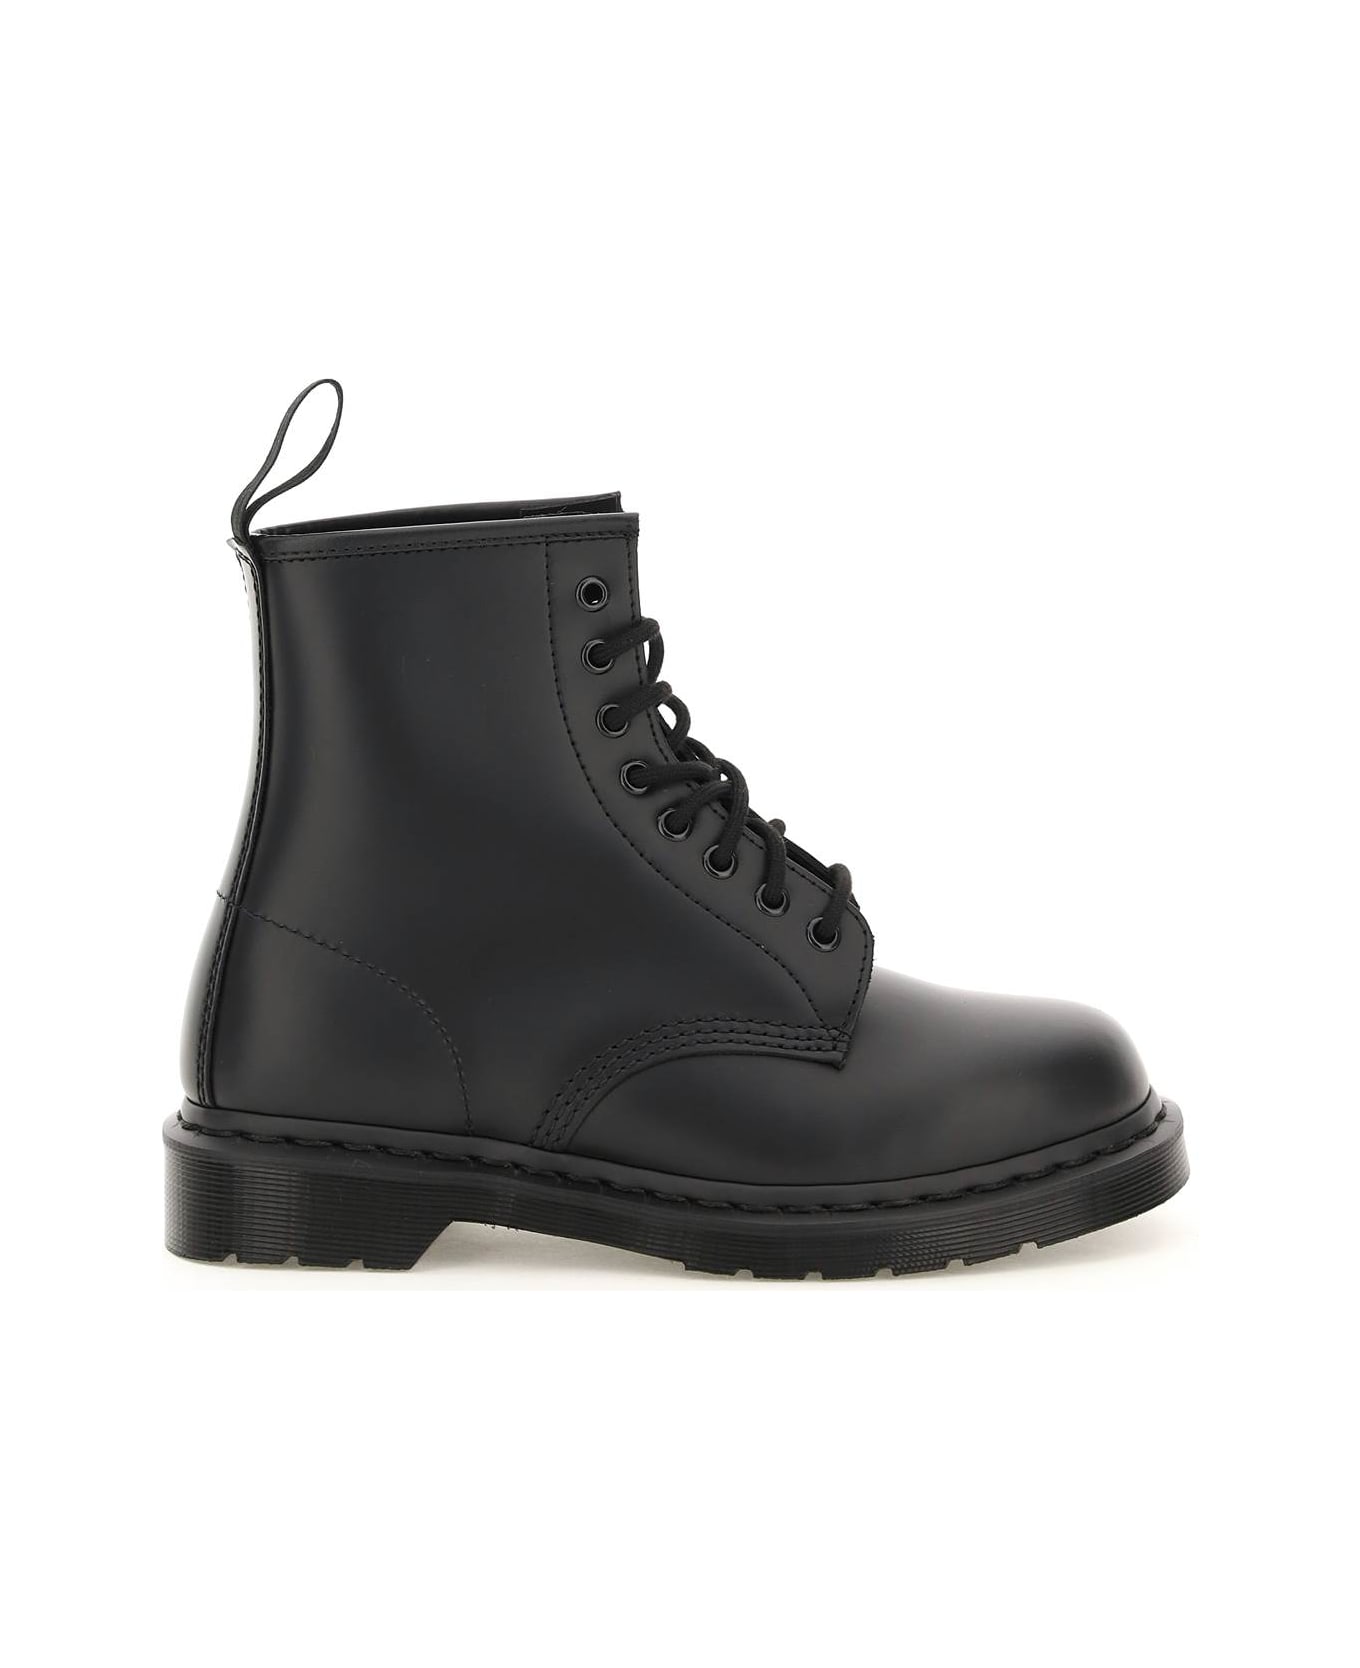 Dr. Martens 1460 Mono Smooth Lace-up Combat Boots - BLACK (Black) ブーツ